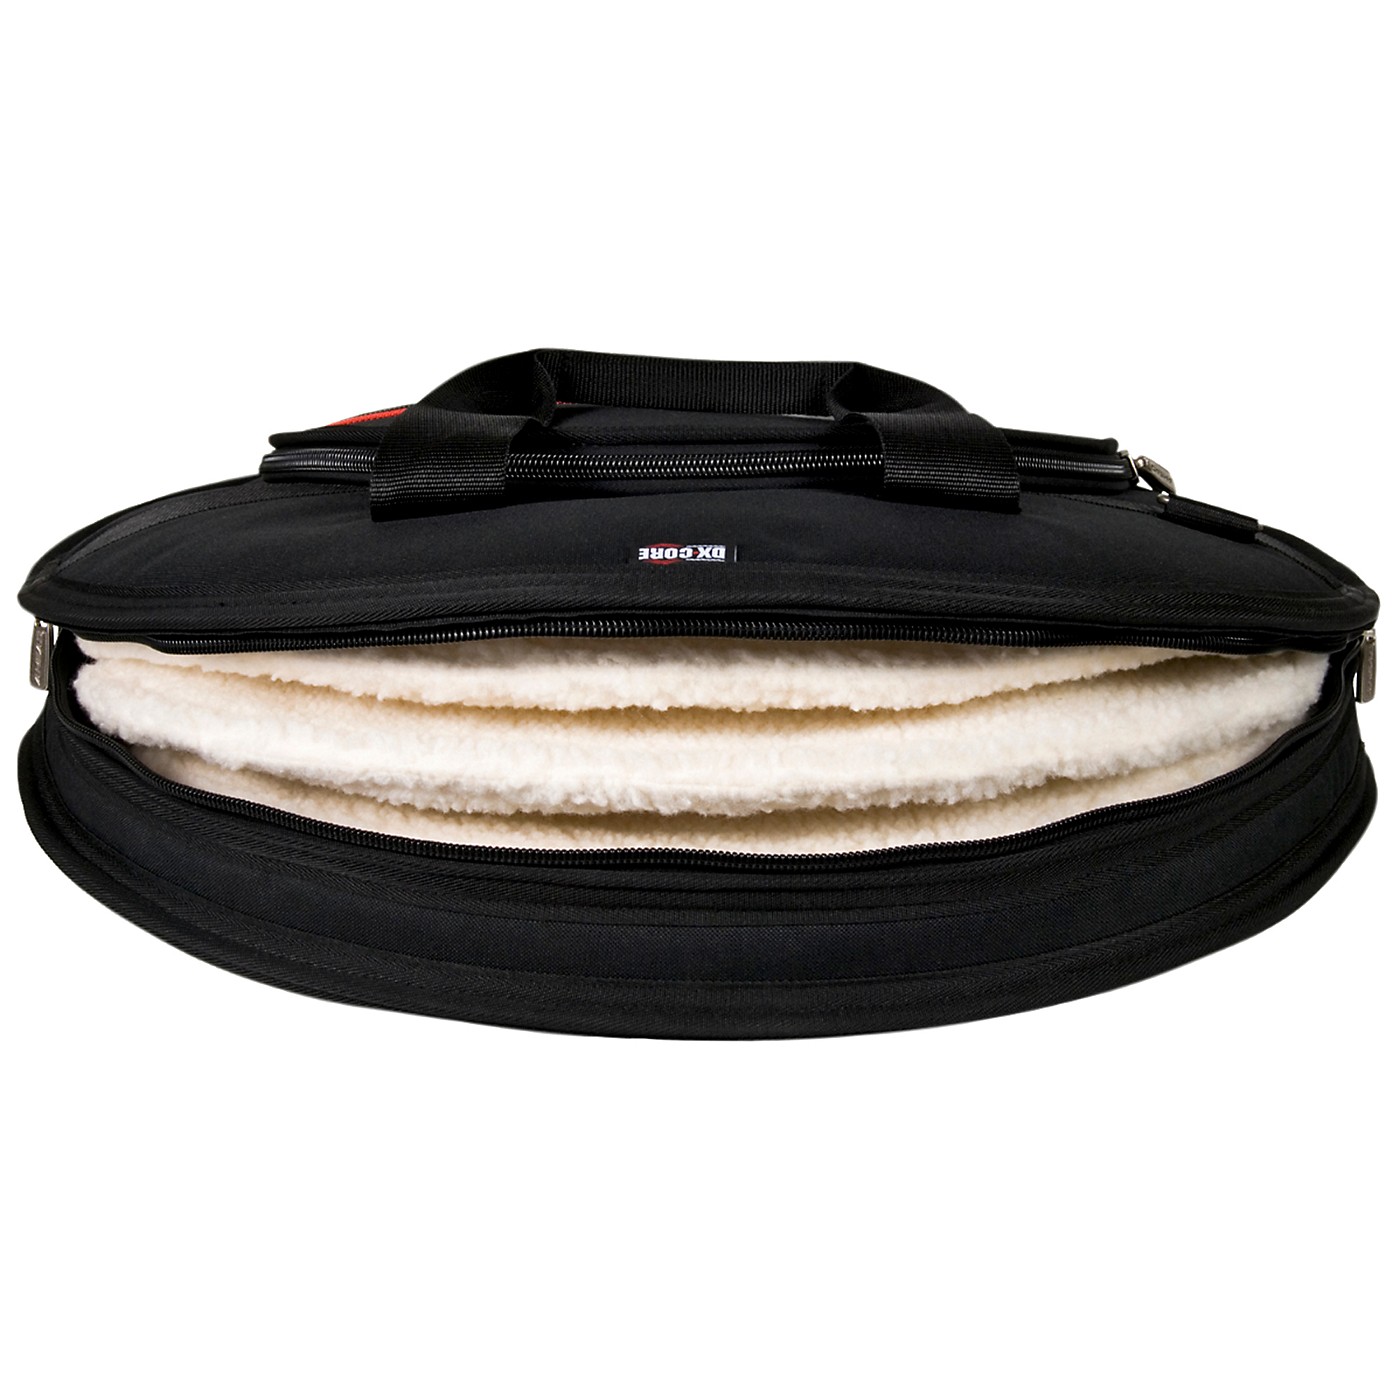 Ahead Armor Cases Deluxe Cymbal Case with Back Pack Straps thumbnail